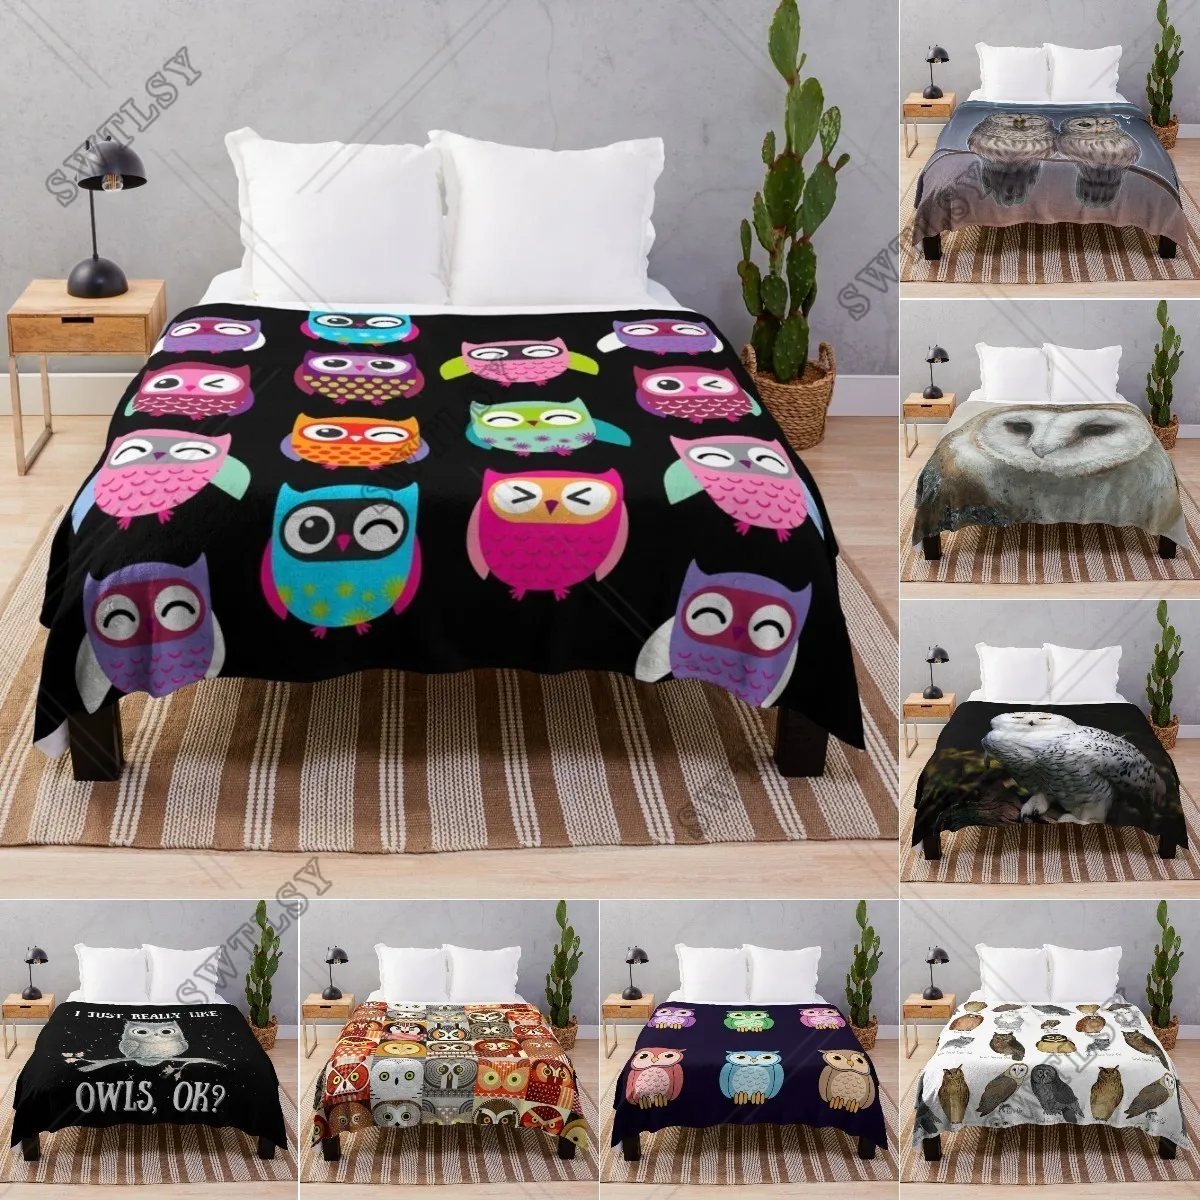 

Owl Blanket Animal Throw Bed Blankets Cozy Lightweight Soft Bedding for Sofa and Bed Office Travel Queen King Twin Size Blanket